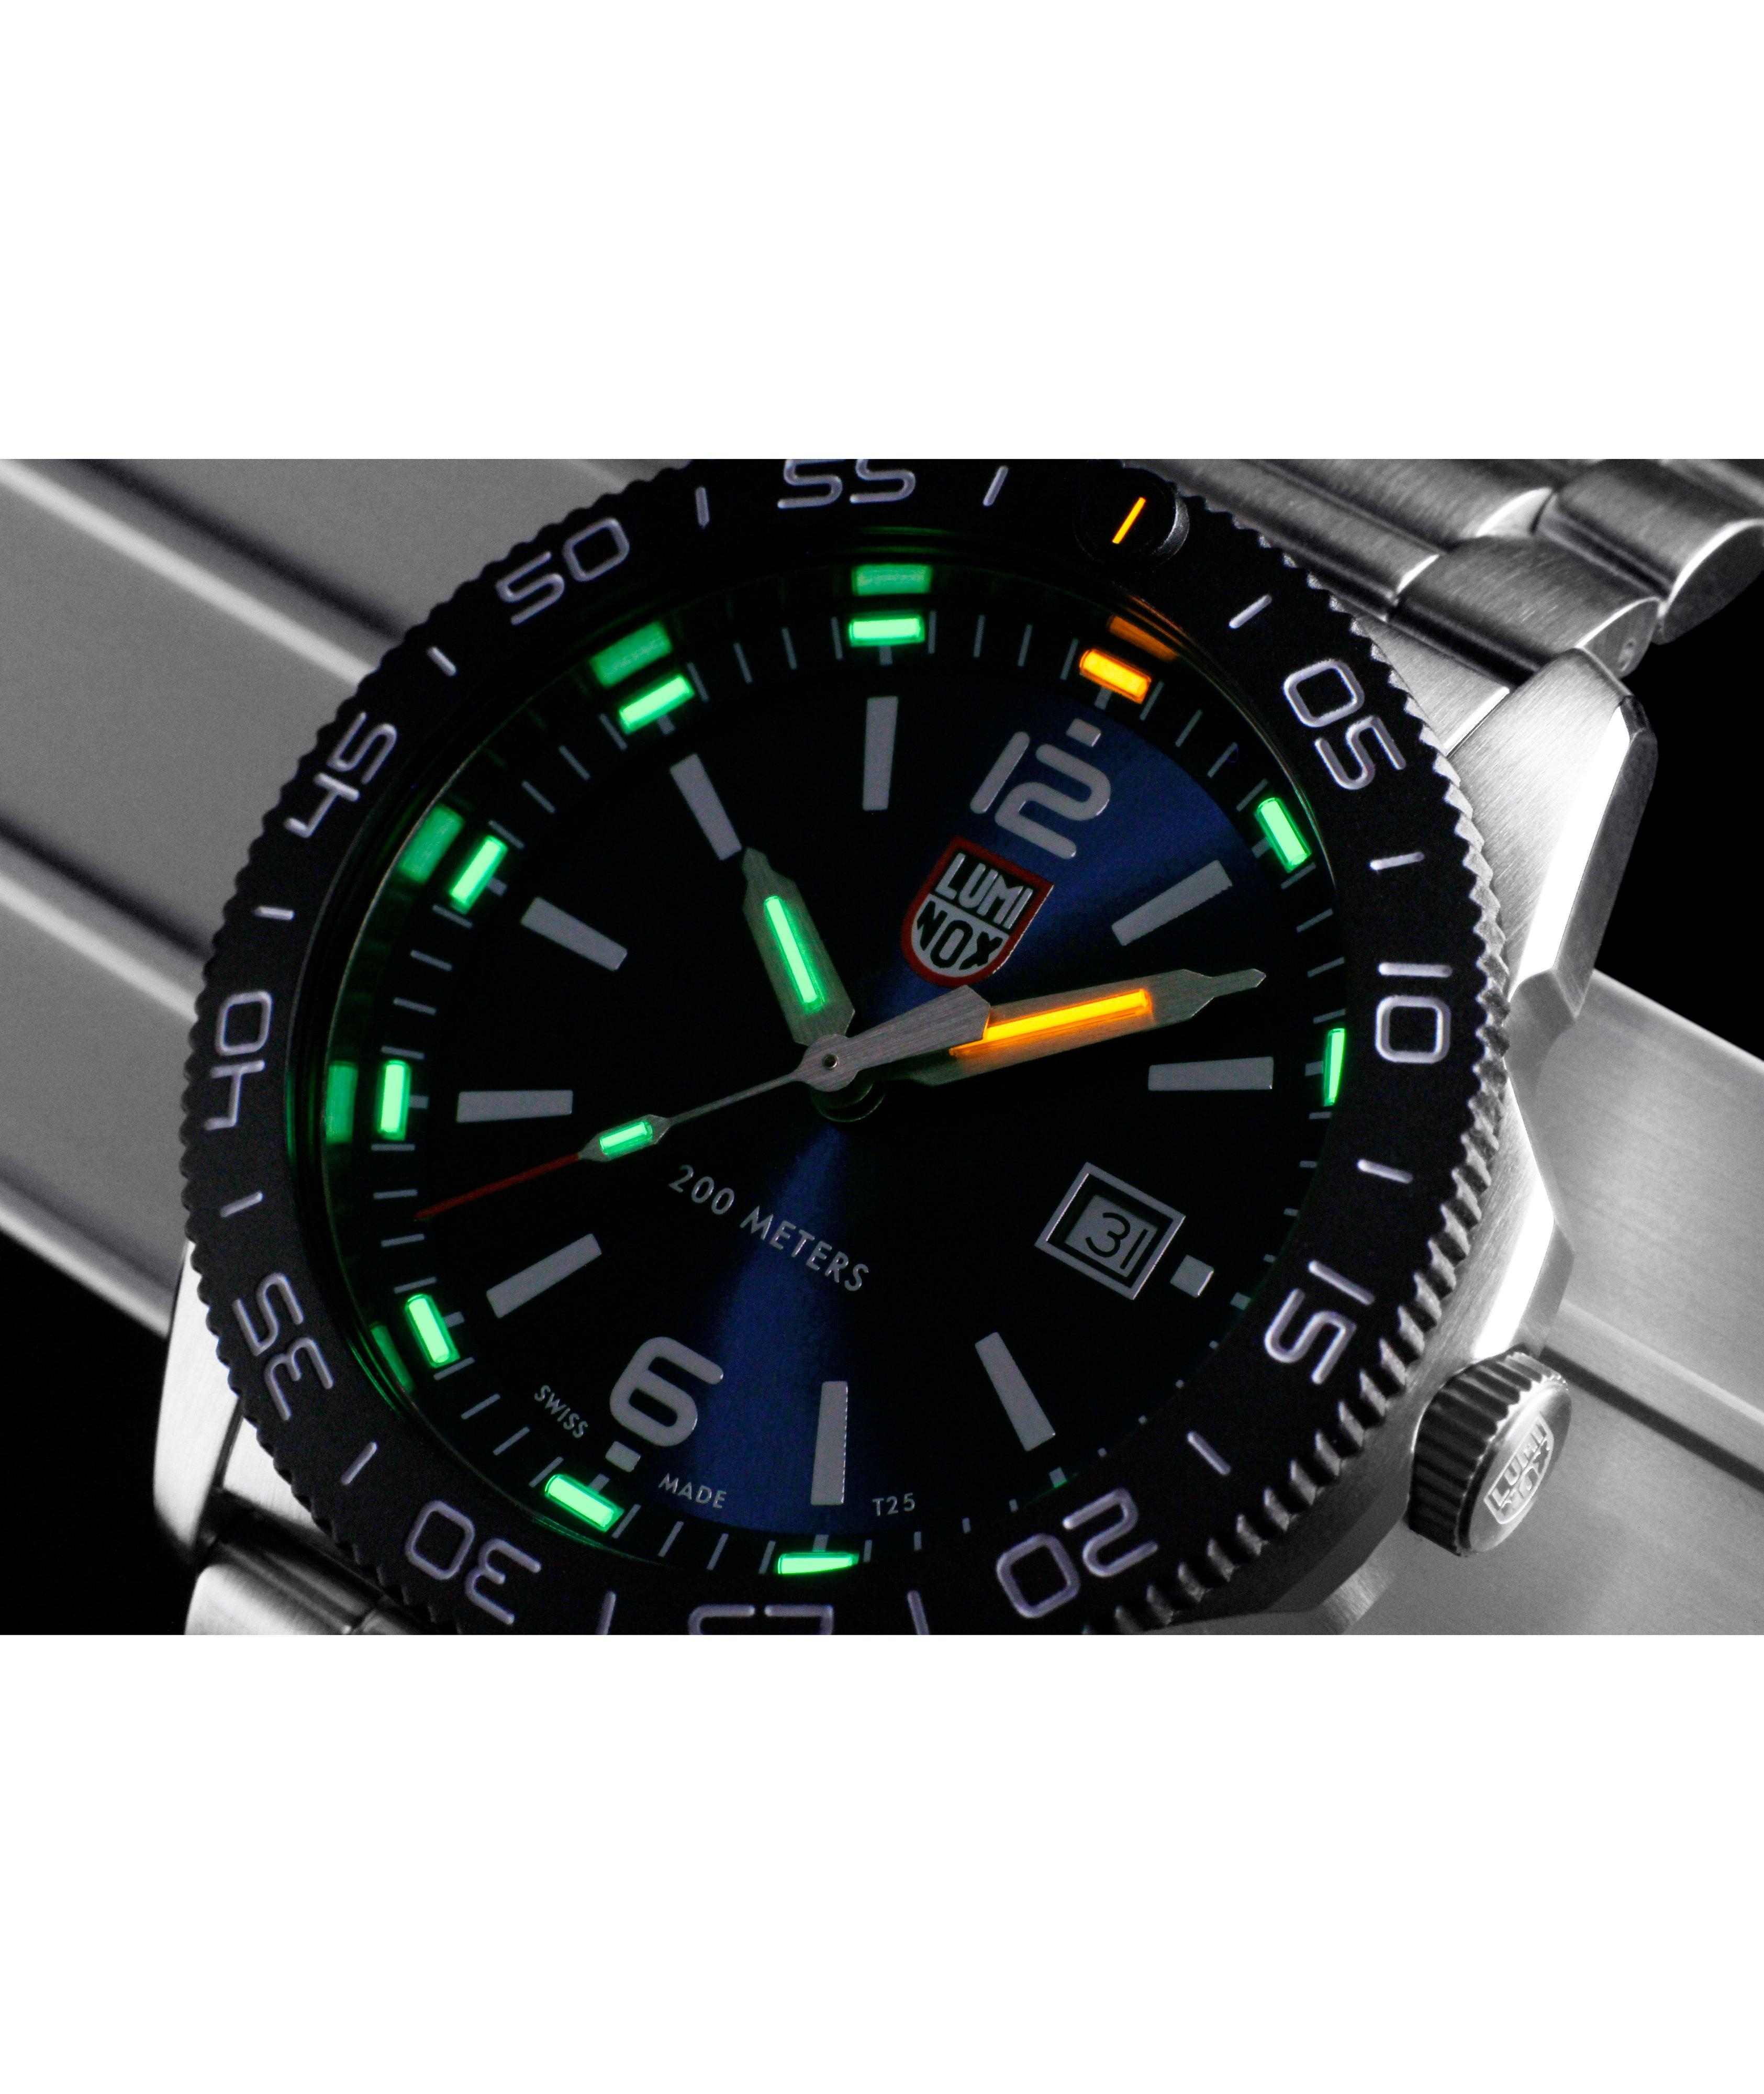 Pacific Diver 3123 Watch image 3